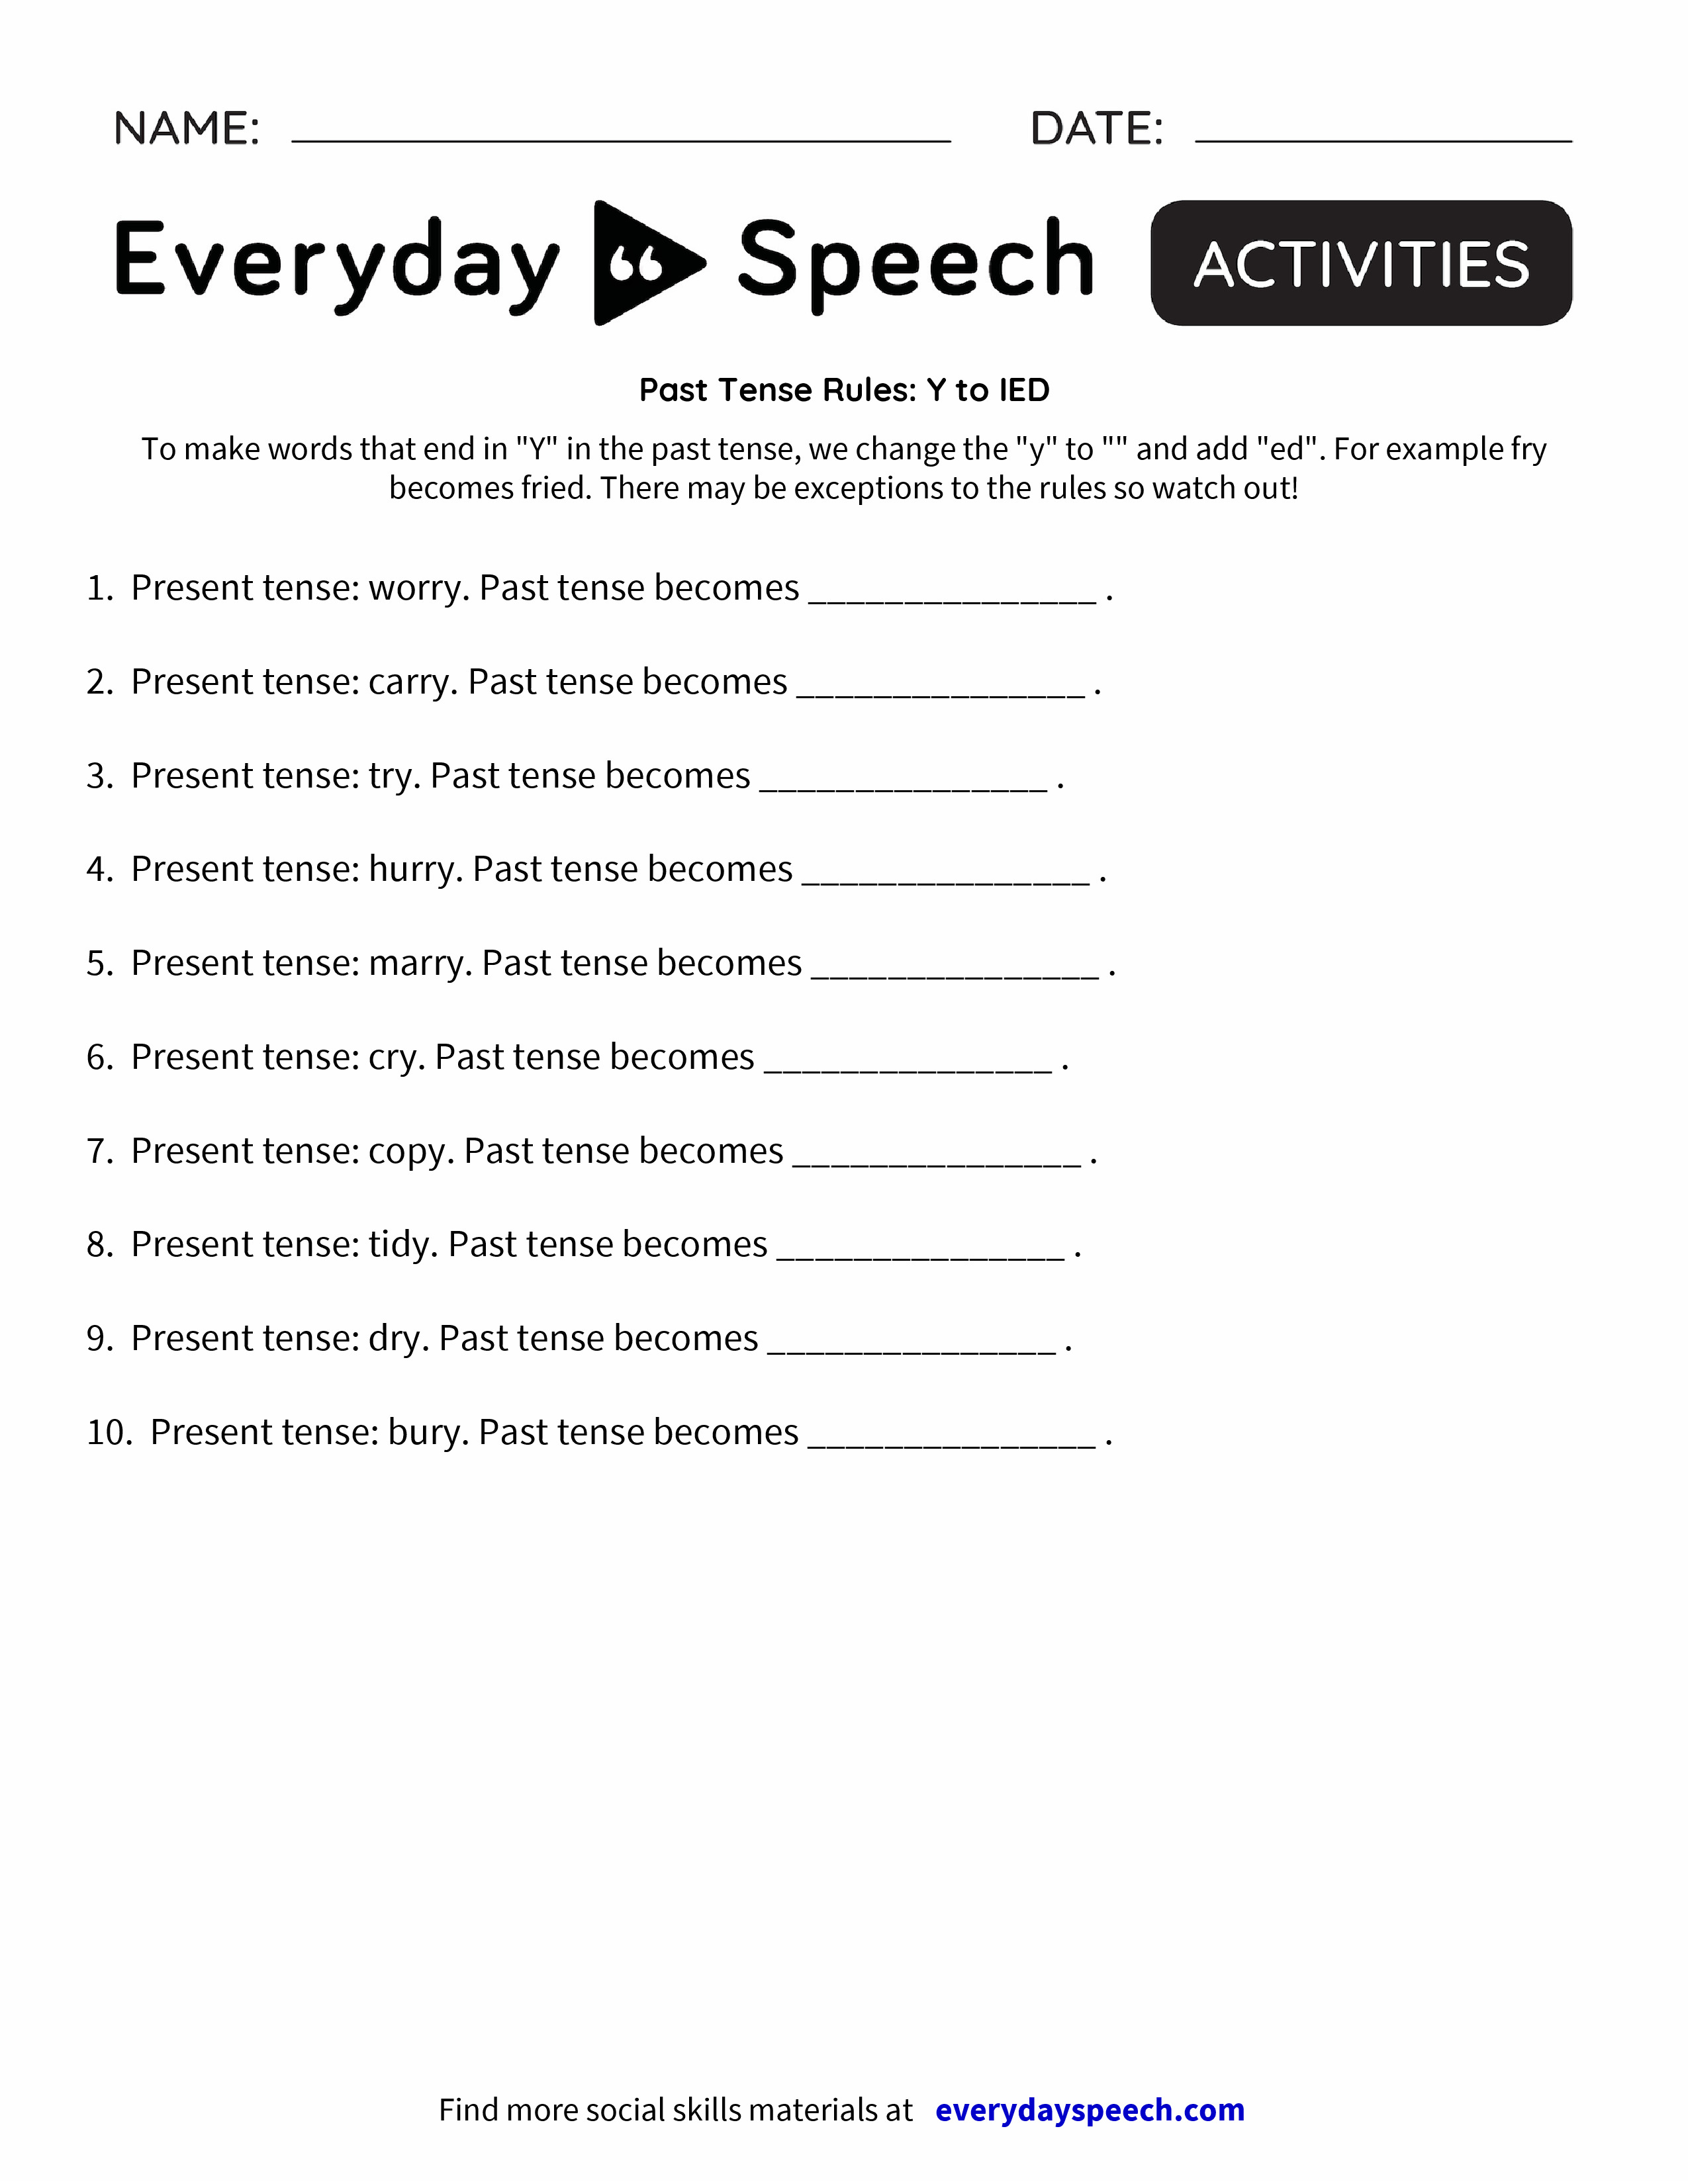 past-tense-rules-y-to-ied-everyday-speech-everyday-speech